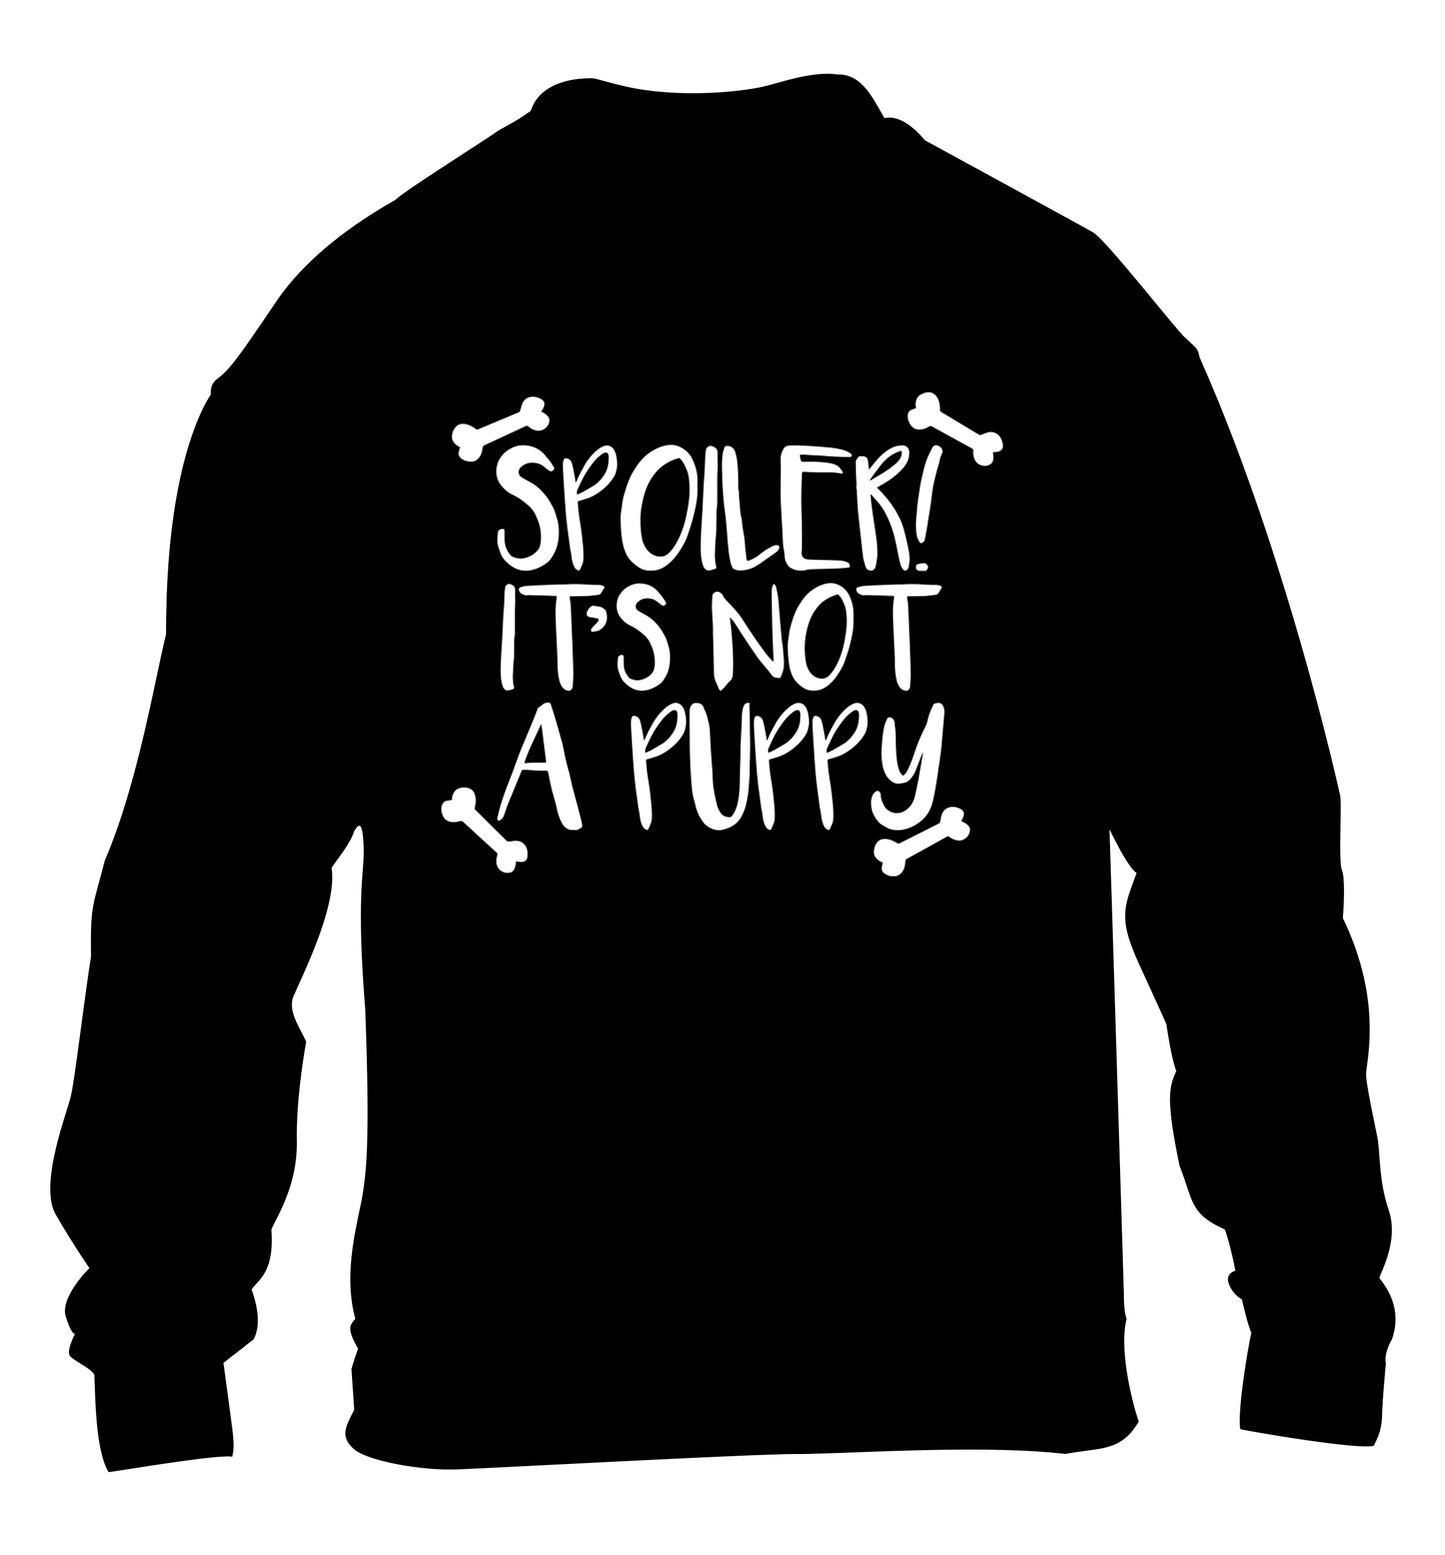 Spoiler it's not a puppy children's black sweater 12-13 Years